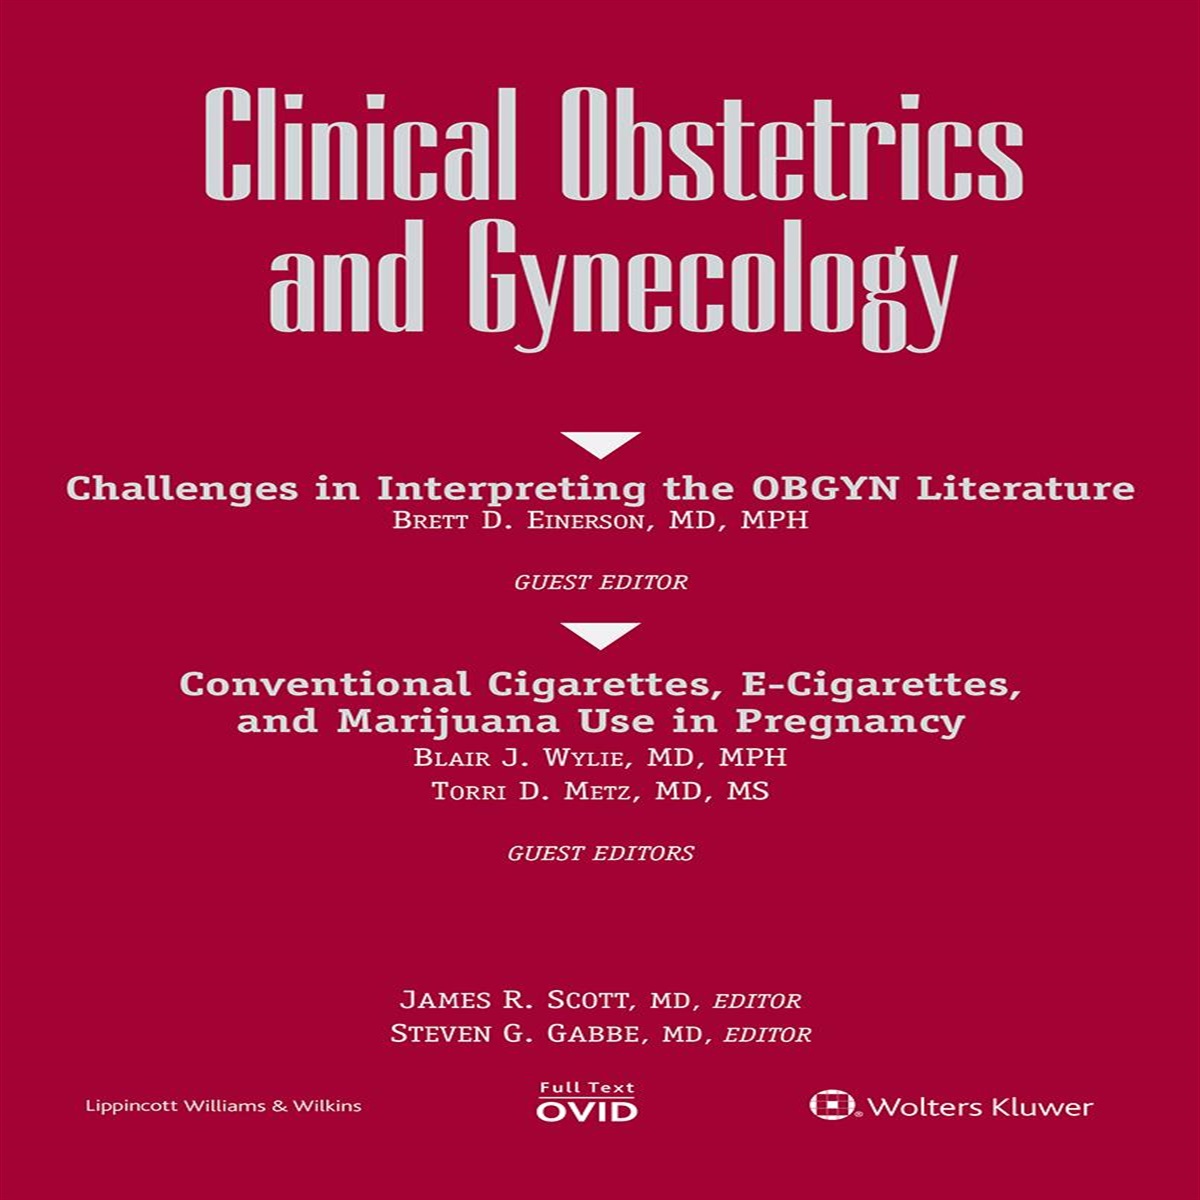 Considerations for the Use of Race in Research in Obstetrics and Gynecology